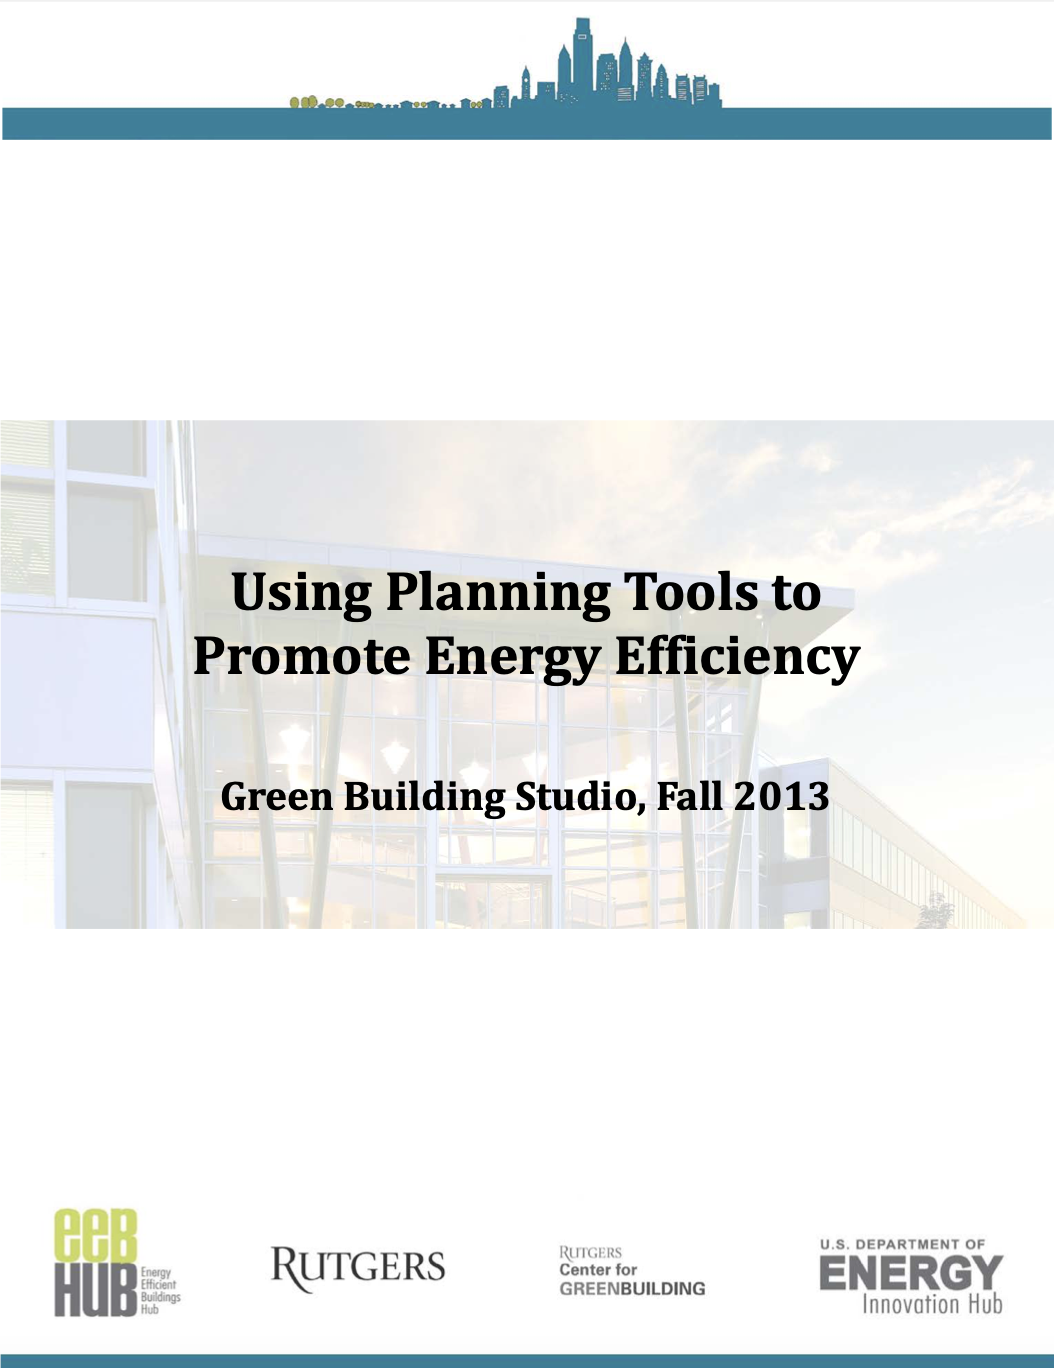 Using Planning Tools to Promote Energy Efficiency